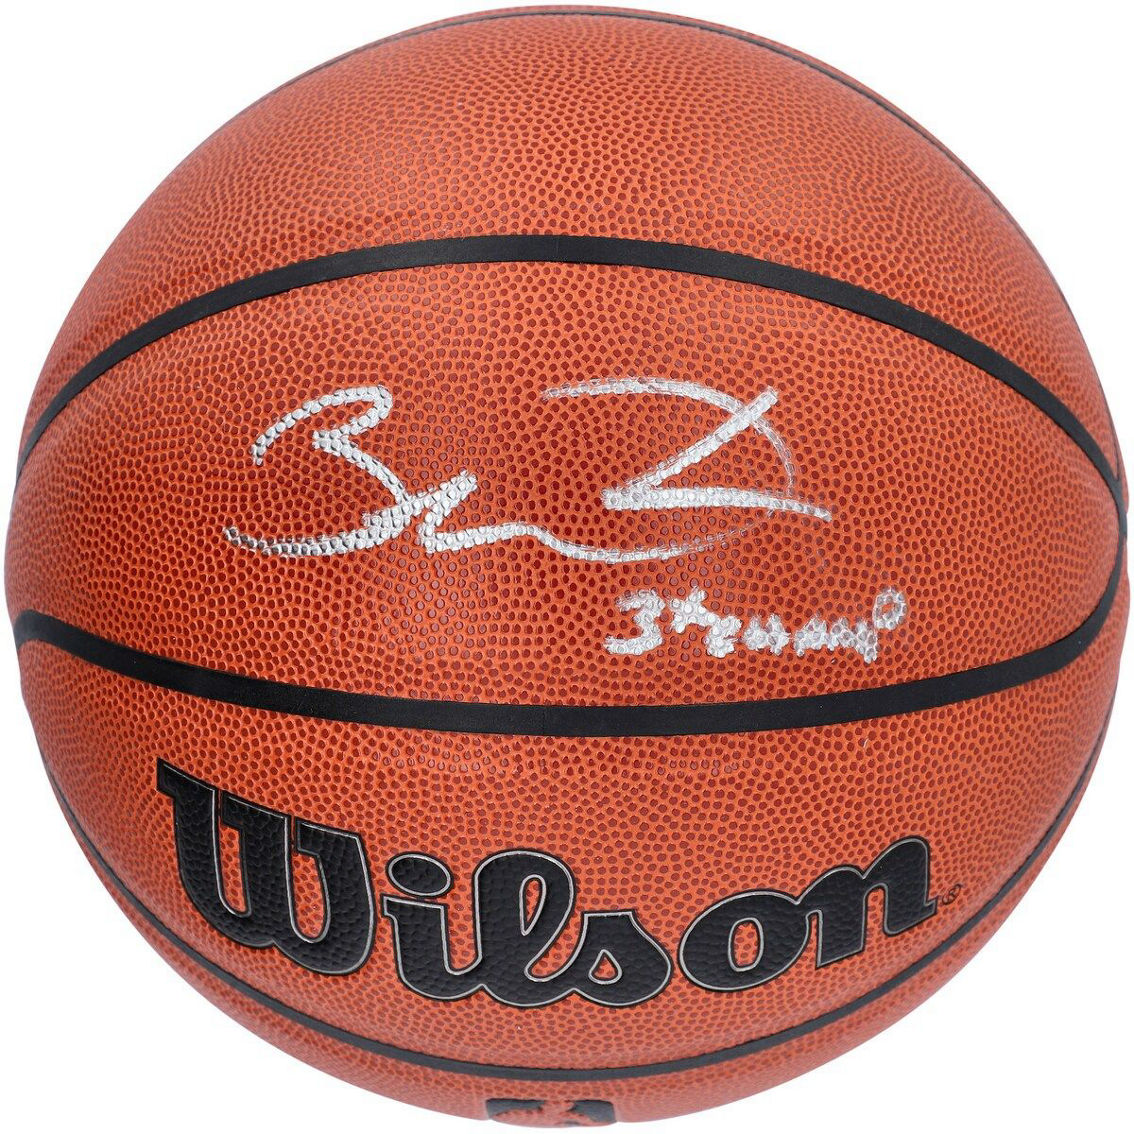 Fanatics Authentic Dwyane Wade Miami Heat Autographed Wilson Authentic Series Indoor/Outdoor Basketball with ''3X NBA CHAMP'' Inscription - Image 2 of 3